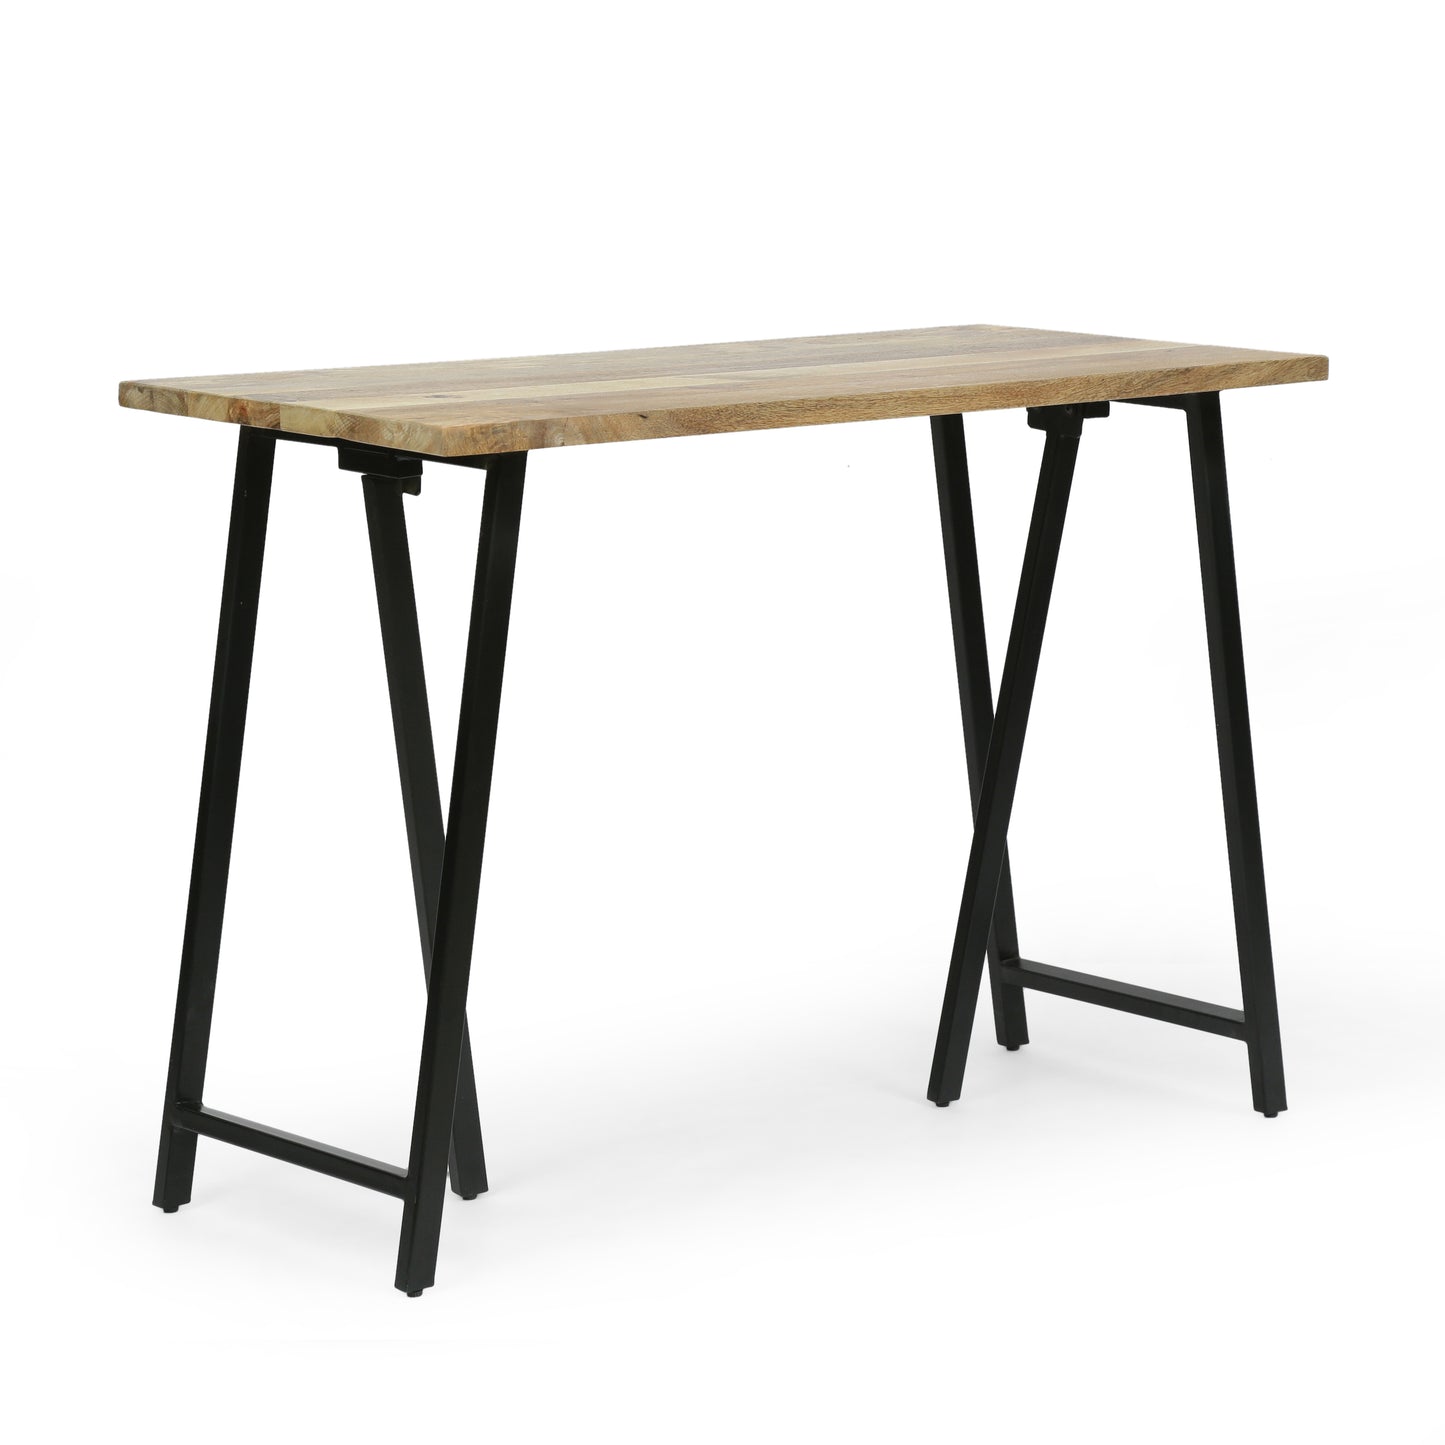 Wrens Modern Industrial Handmade Mango Wood Console Table, Natural and Black